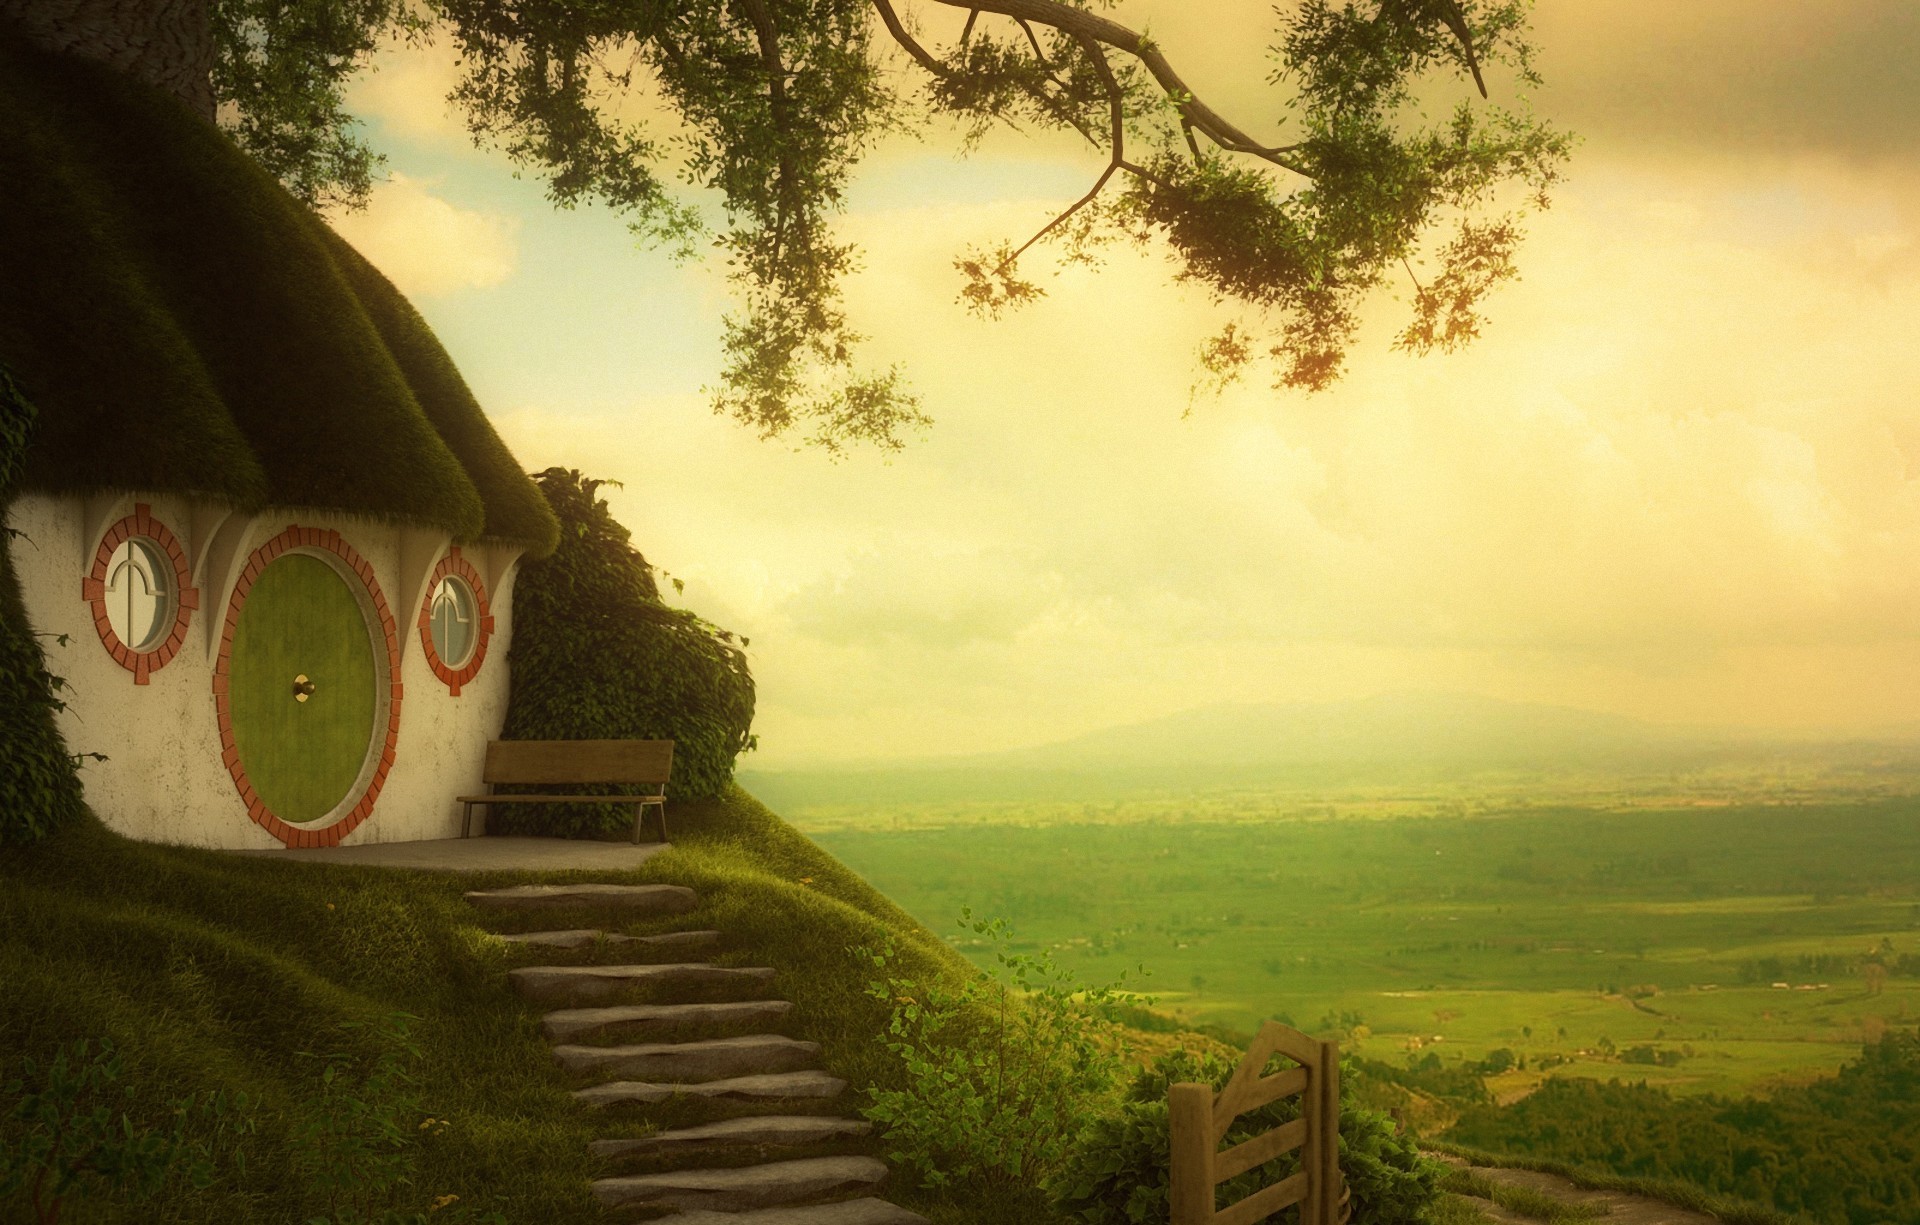 1920x1225 The Shire - For all LotR fans